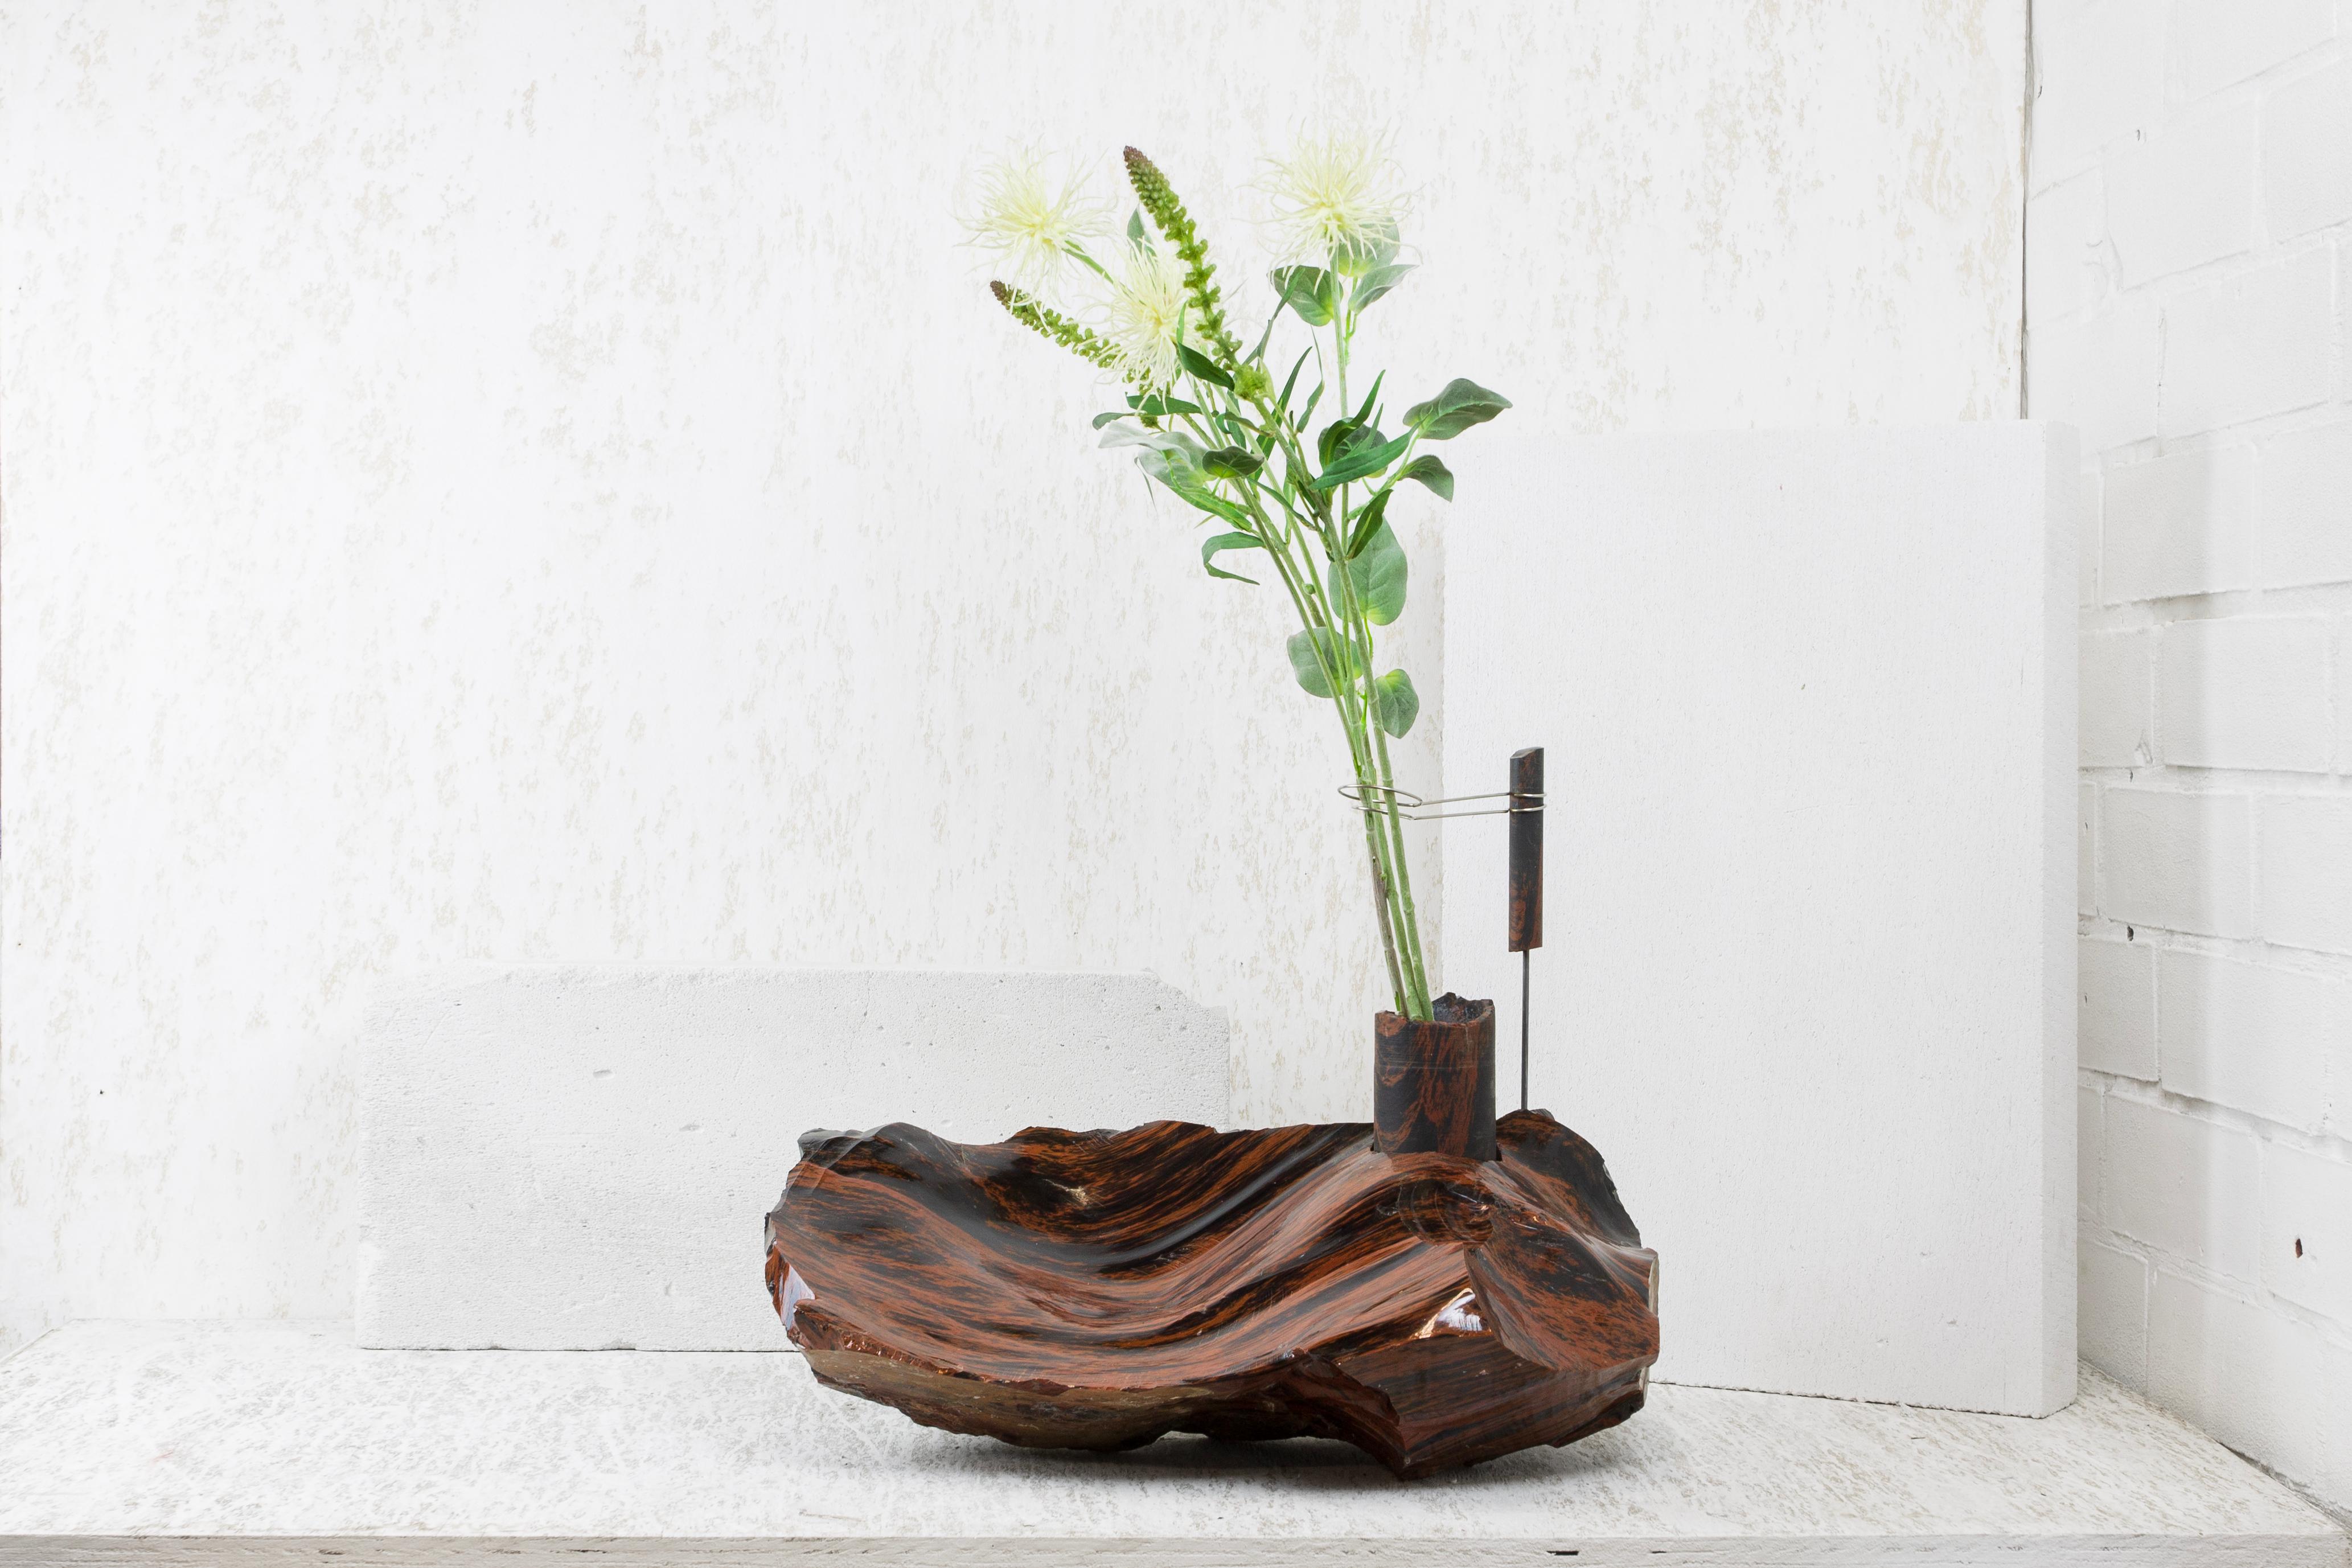 Mahogany Obsidian Flower Vessel by Studio DO
Dimensions: D 50 x W 34 x H 41 cm
Materials: Mahogany Obsidian, stainless steel.
26 kg.

Flowers are intrinsically connected with composition and earth.
Influenced by varied vessels from past to present